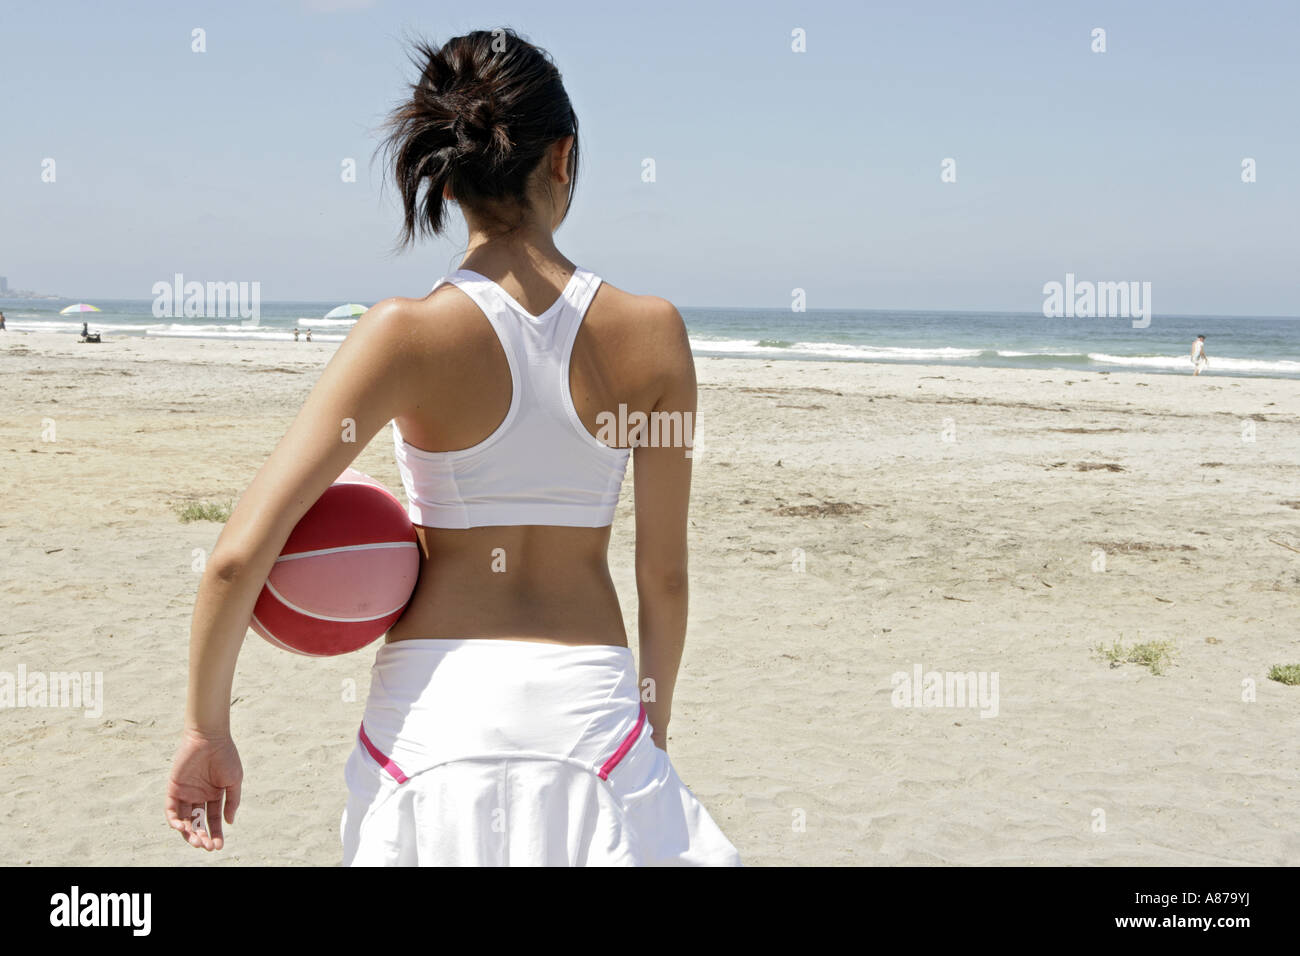 A woman is holding a rubber ball and standing on a beach. Stock Photo